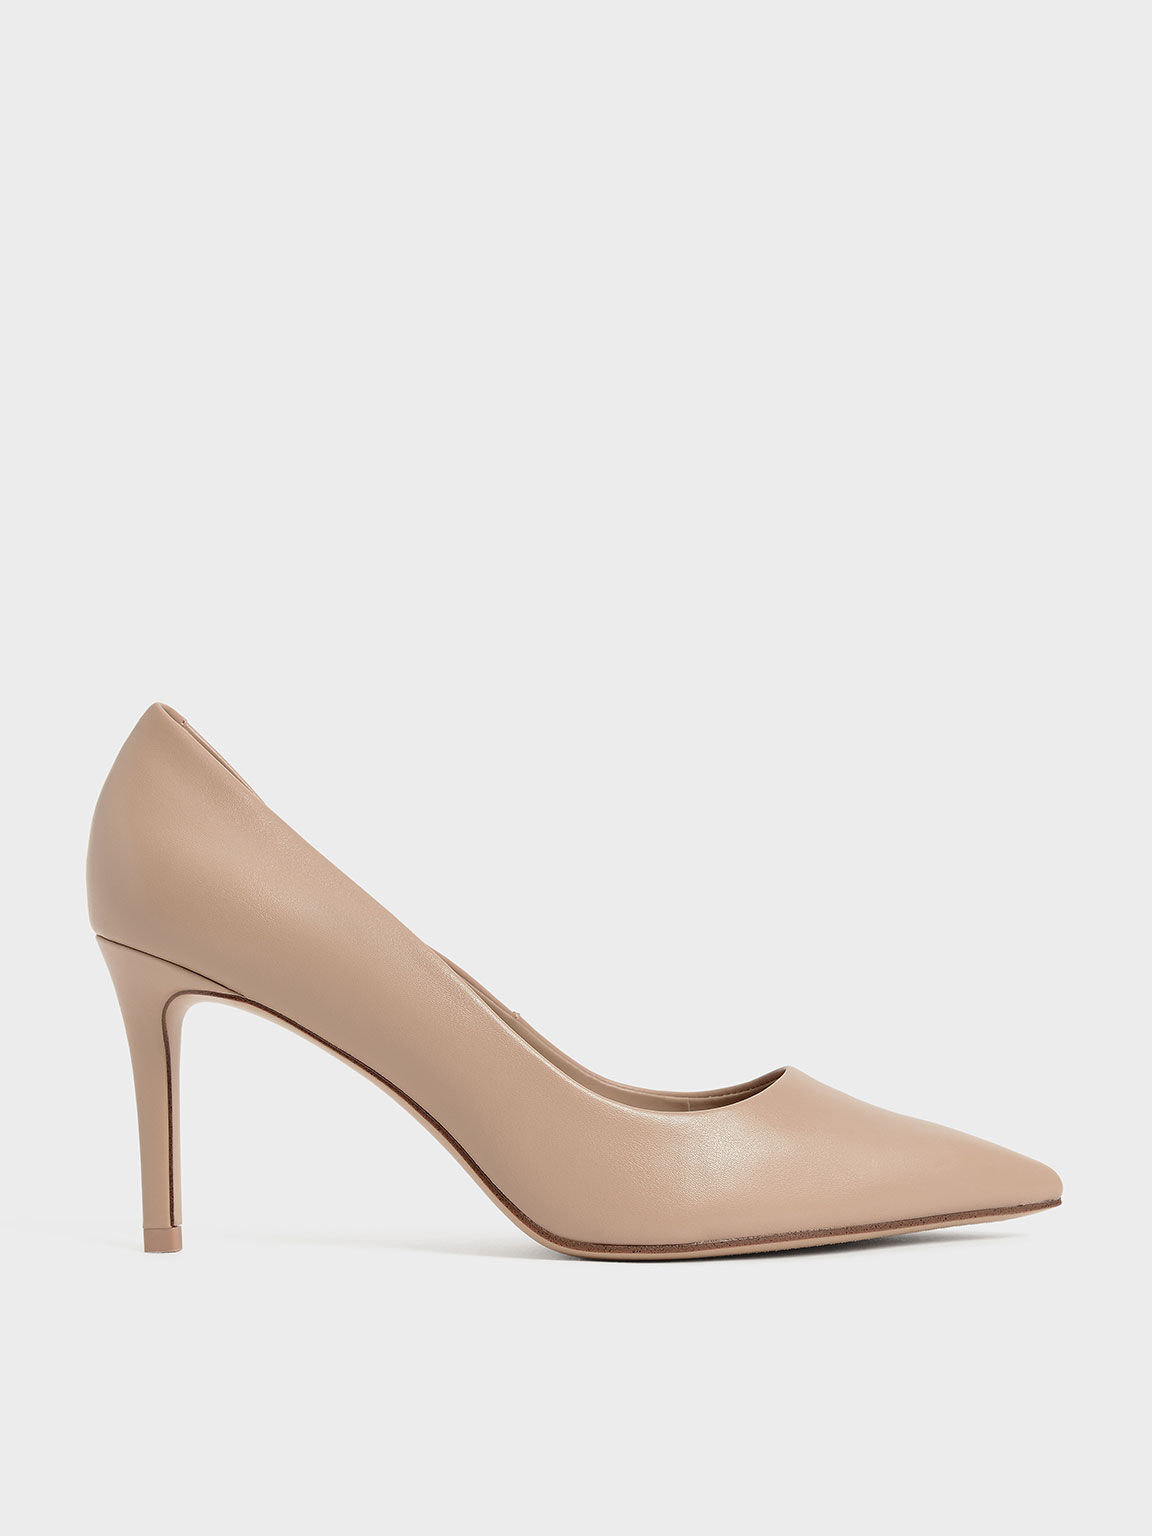 Portal kom videre Udlevering Nude Pointed Toe Stiletto Pumps - CHARLES & KEITH US